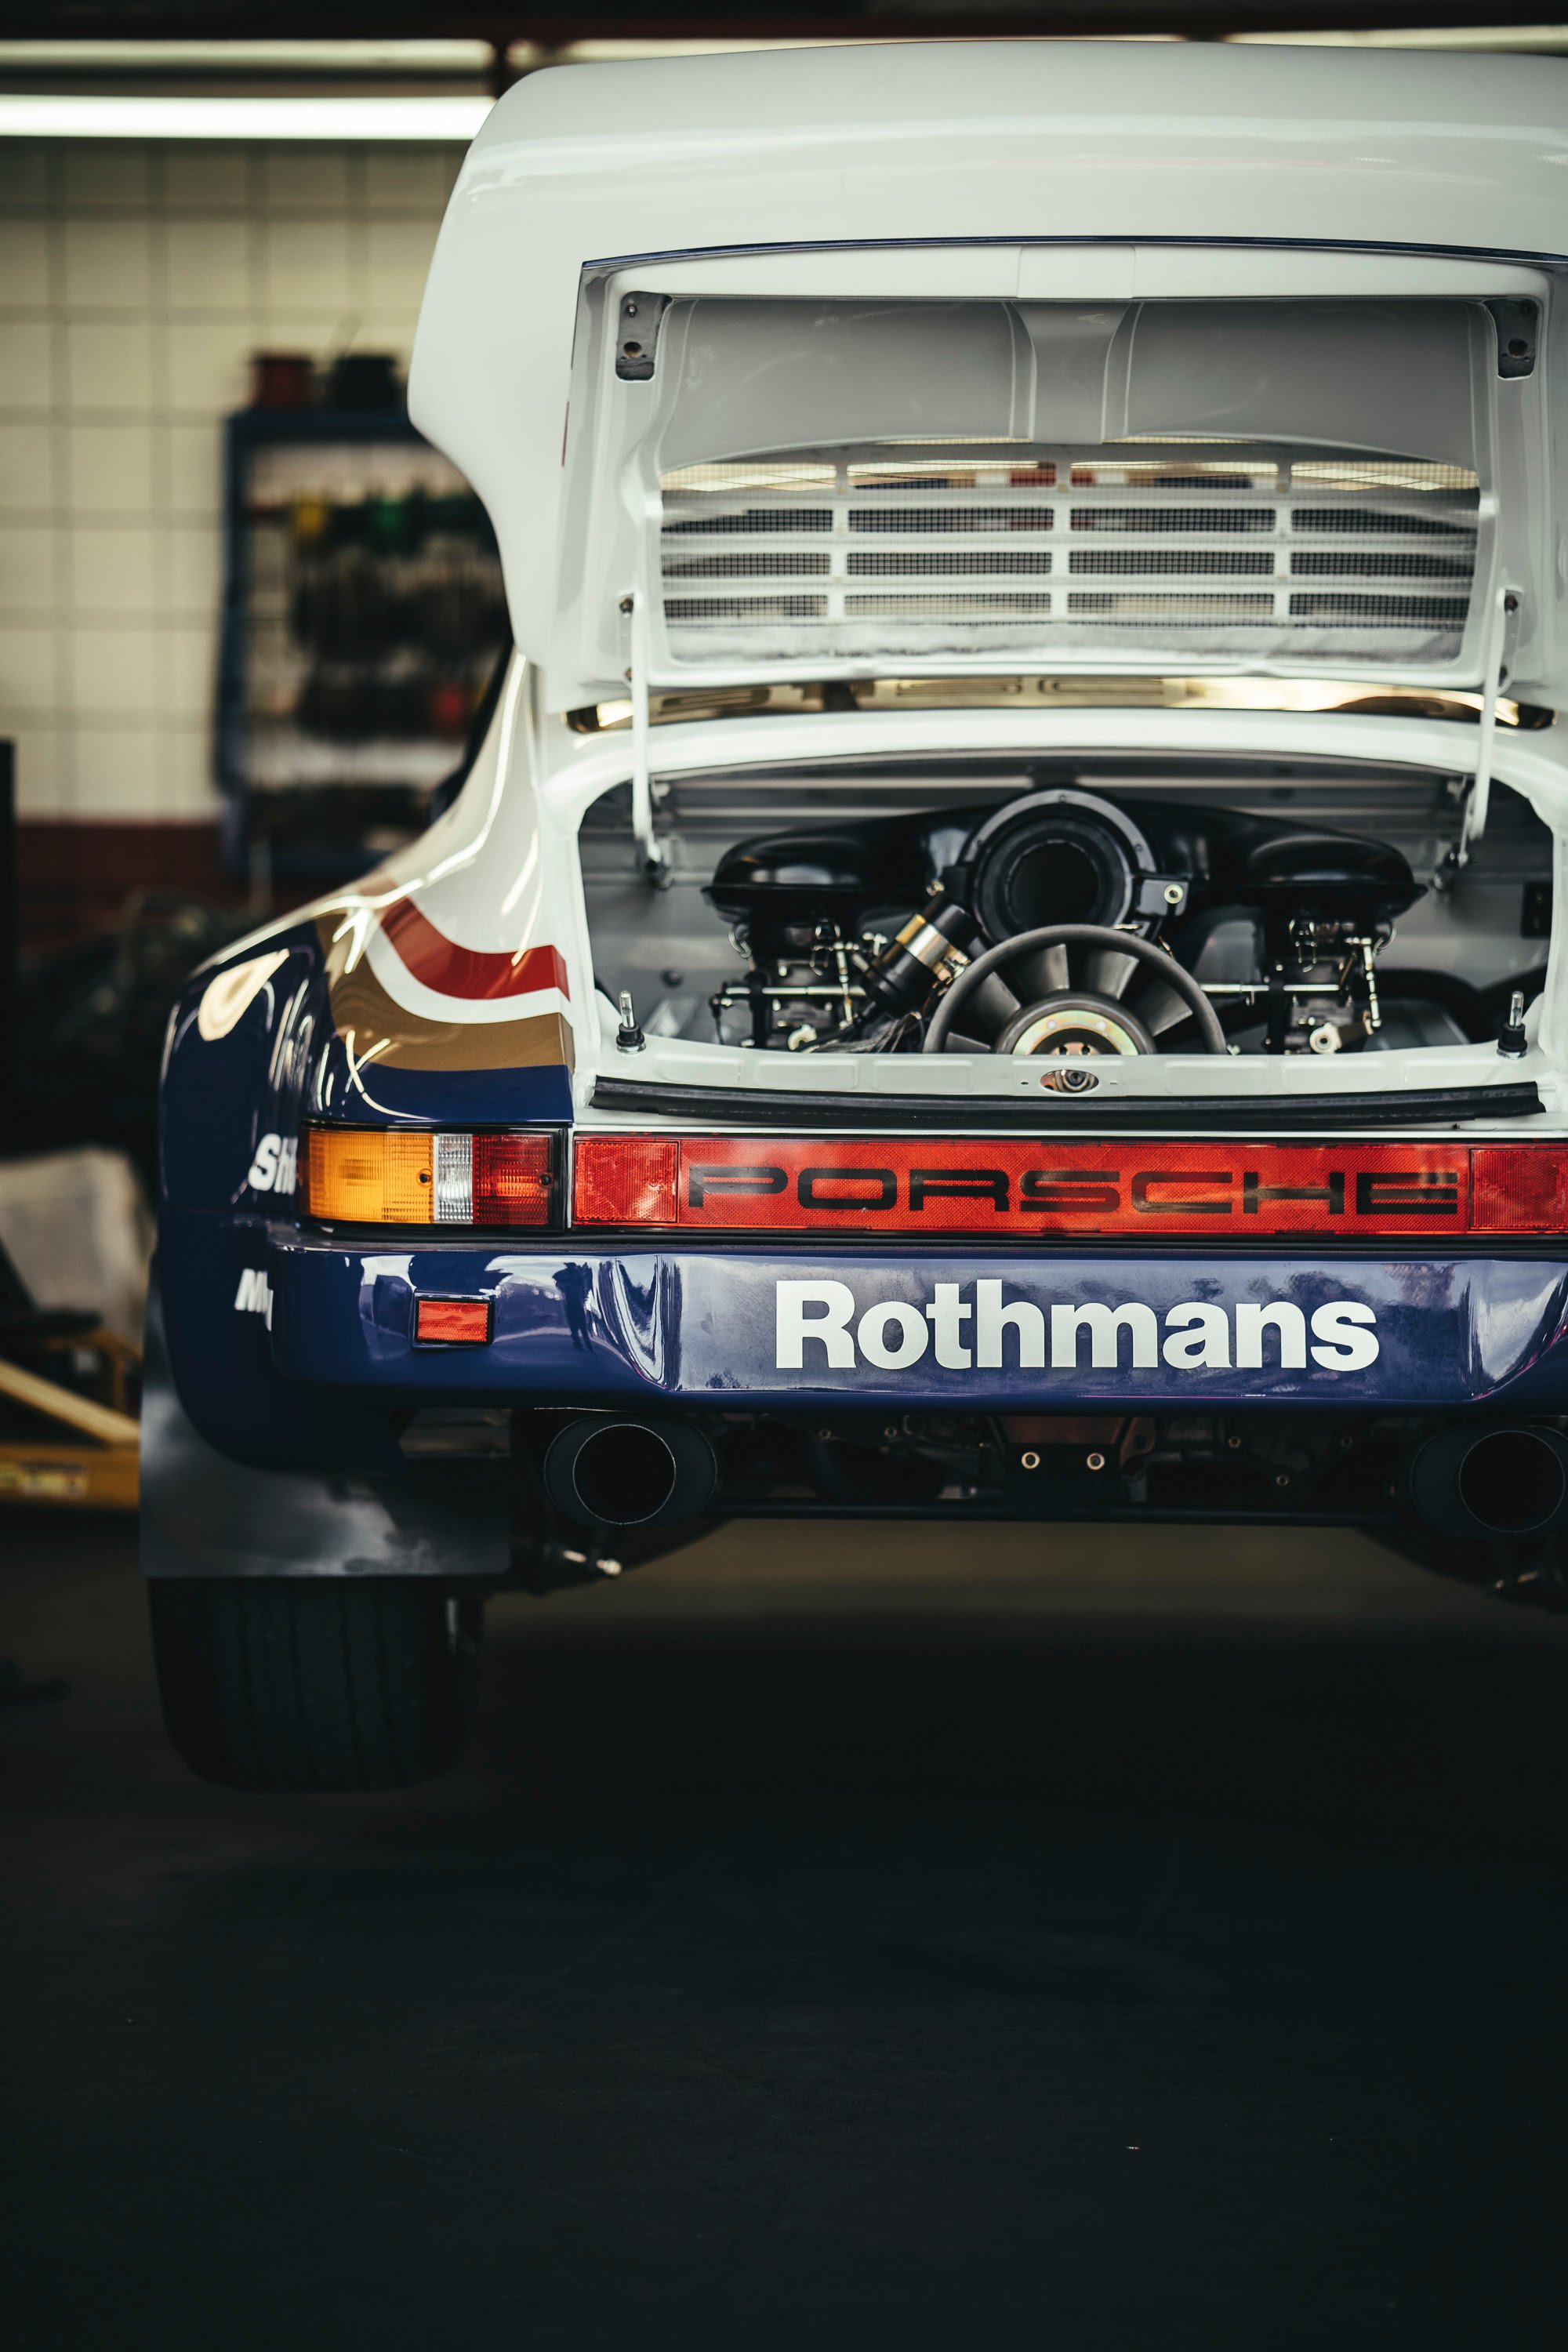 Rothmans livery on a 911.